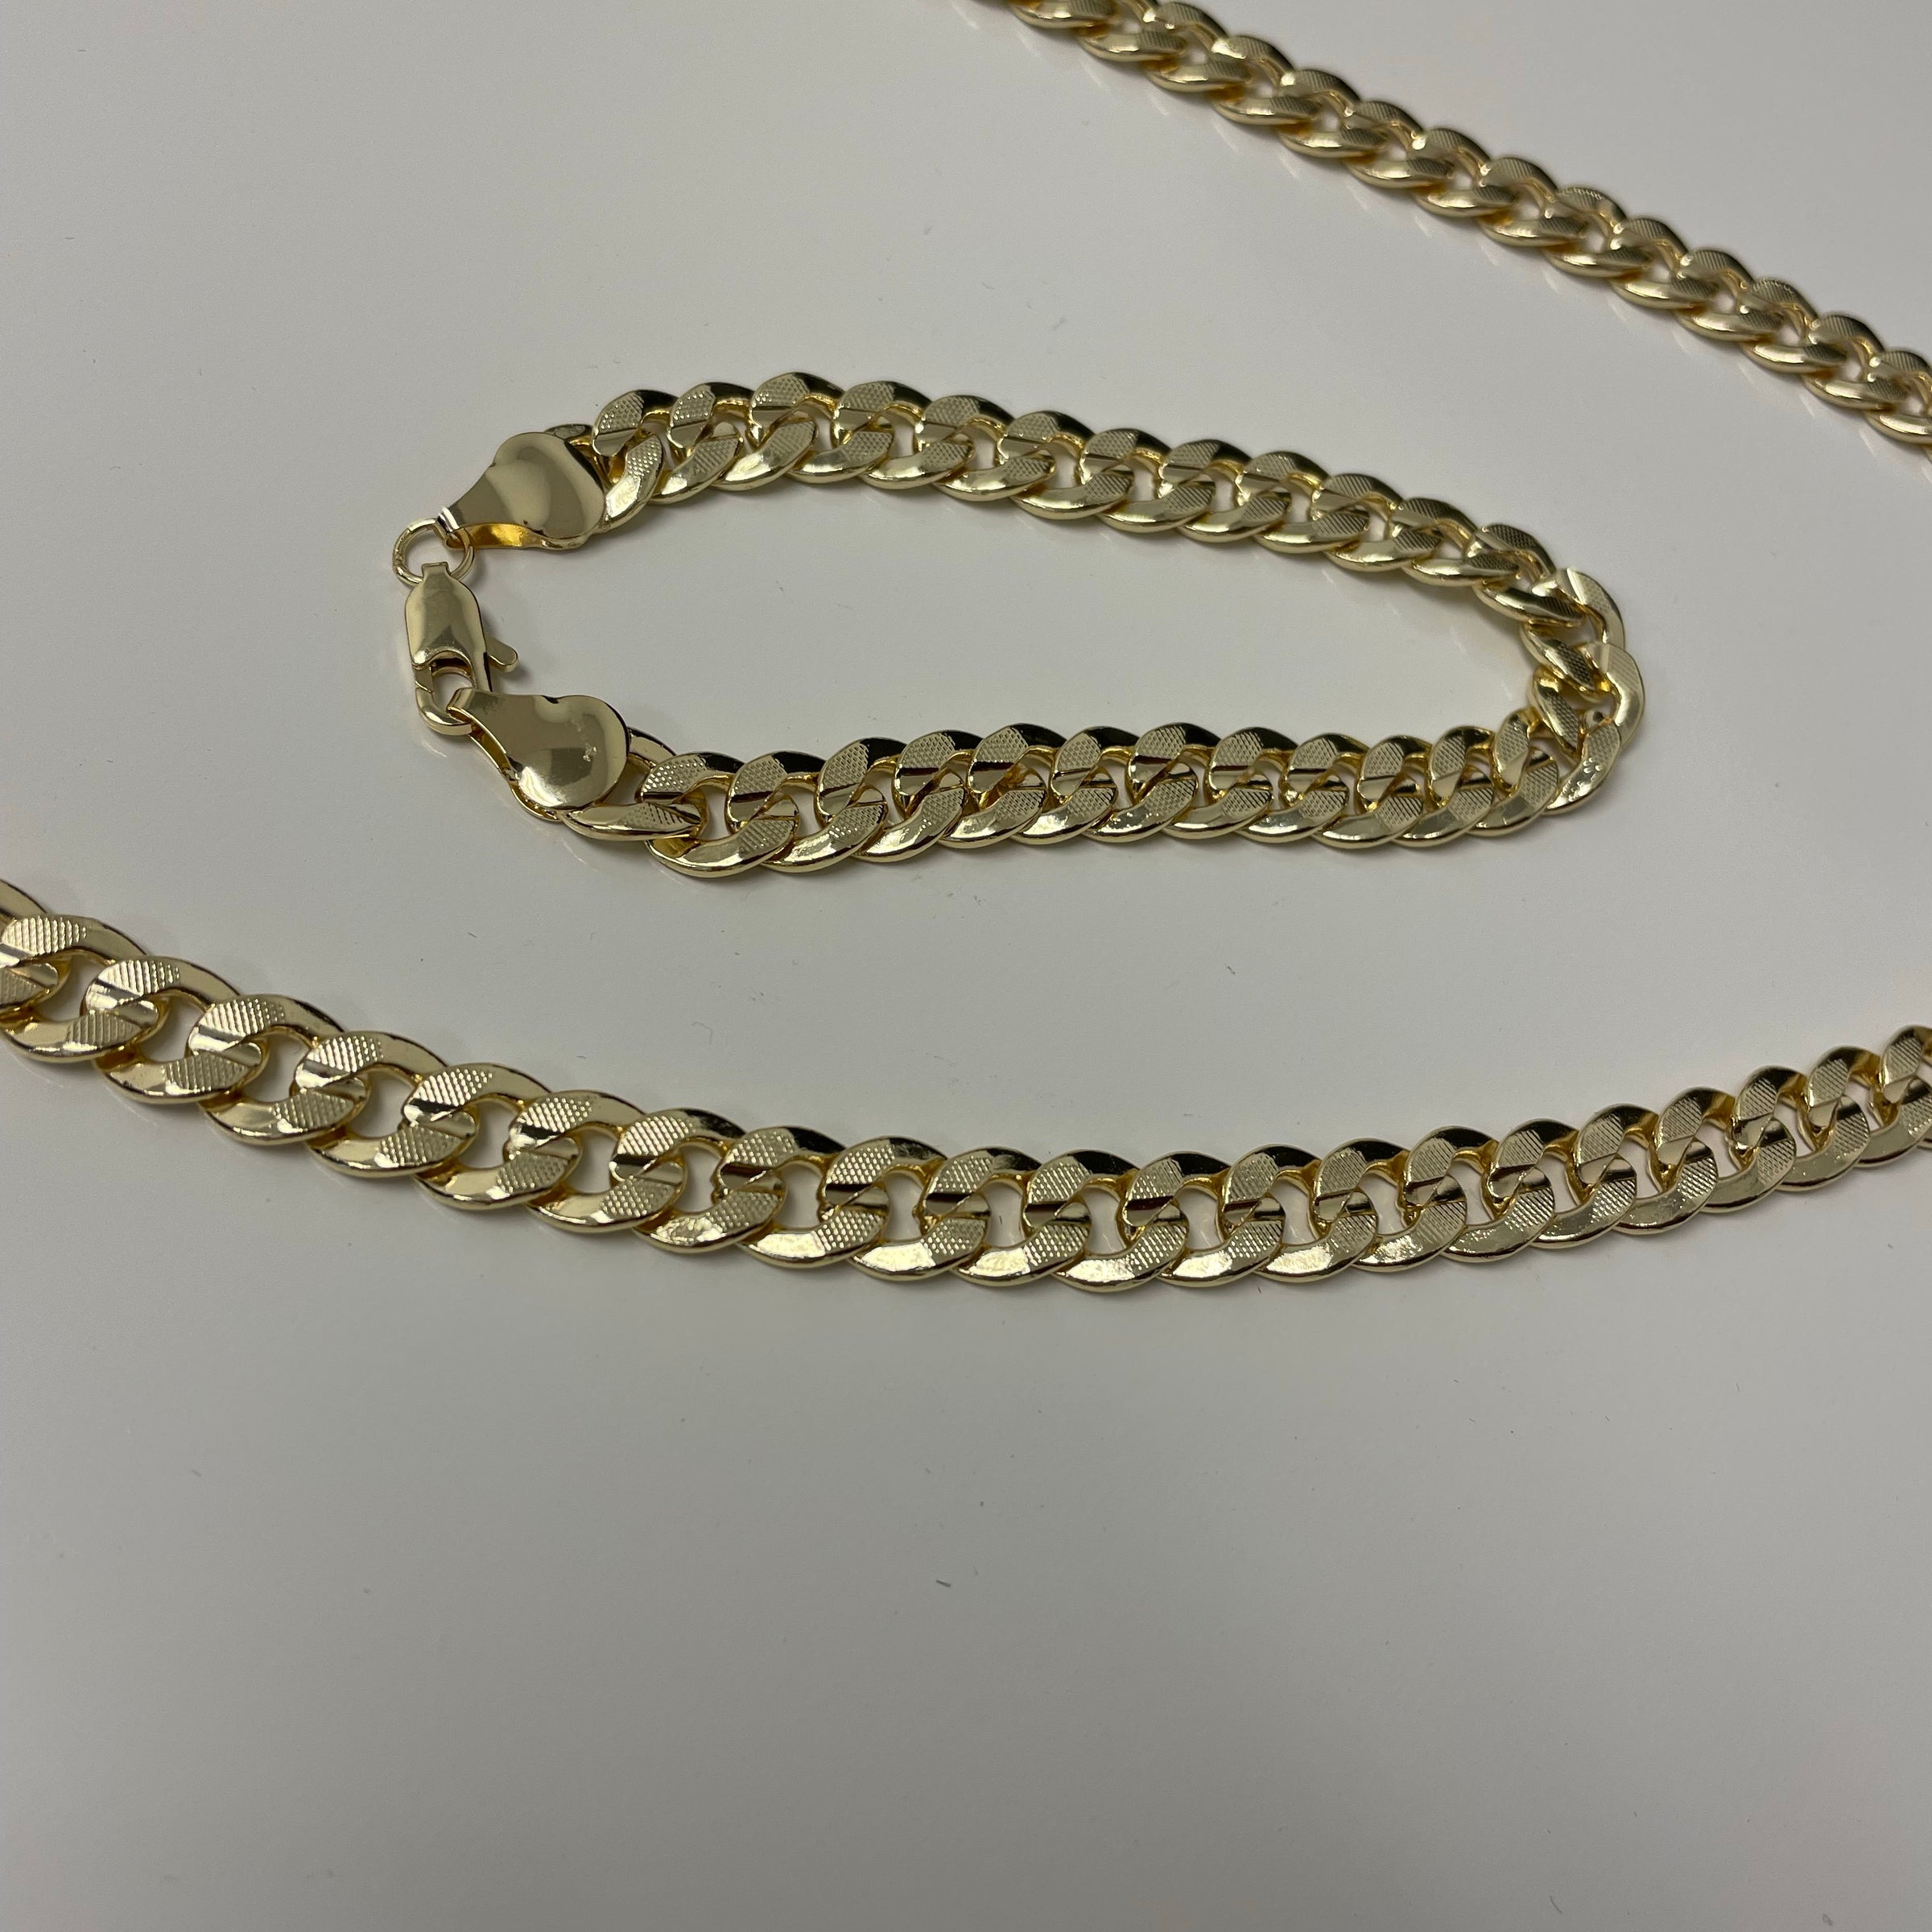 Cuban Link Diamond Cut 14K Gold Filled Necklace 24" Chain and 8.5" Bracelet Jewelry Chain Set